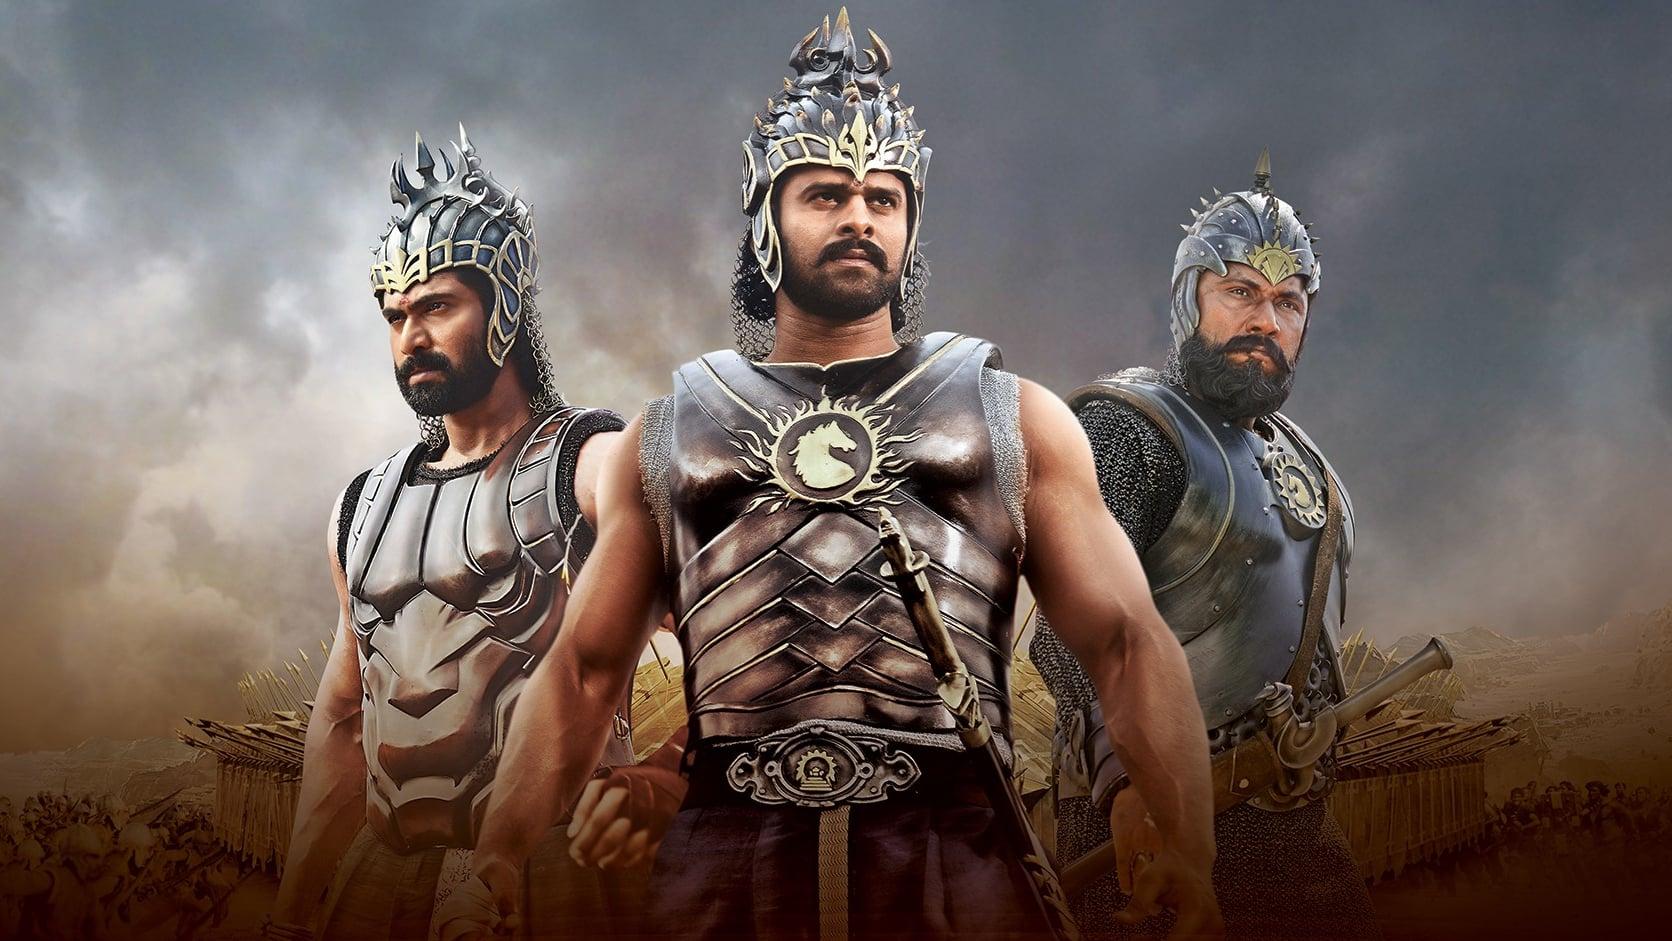 Watch Bahubali 2 The Conclusion with your Gang